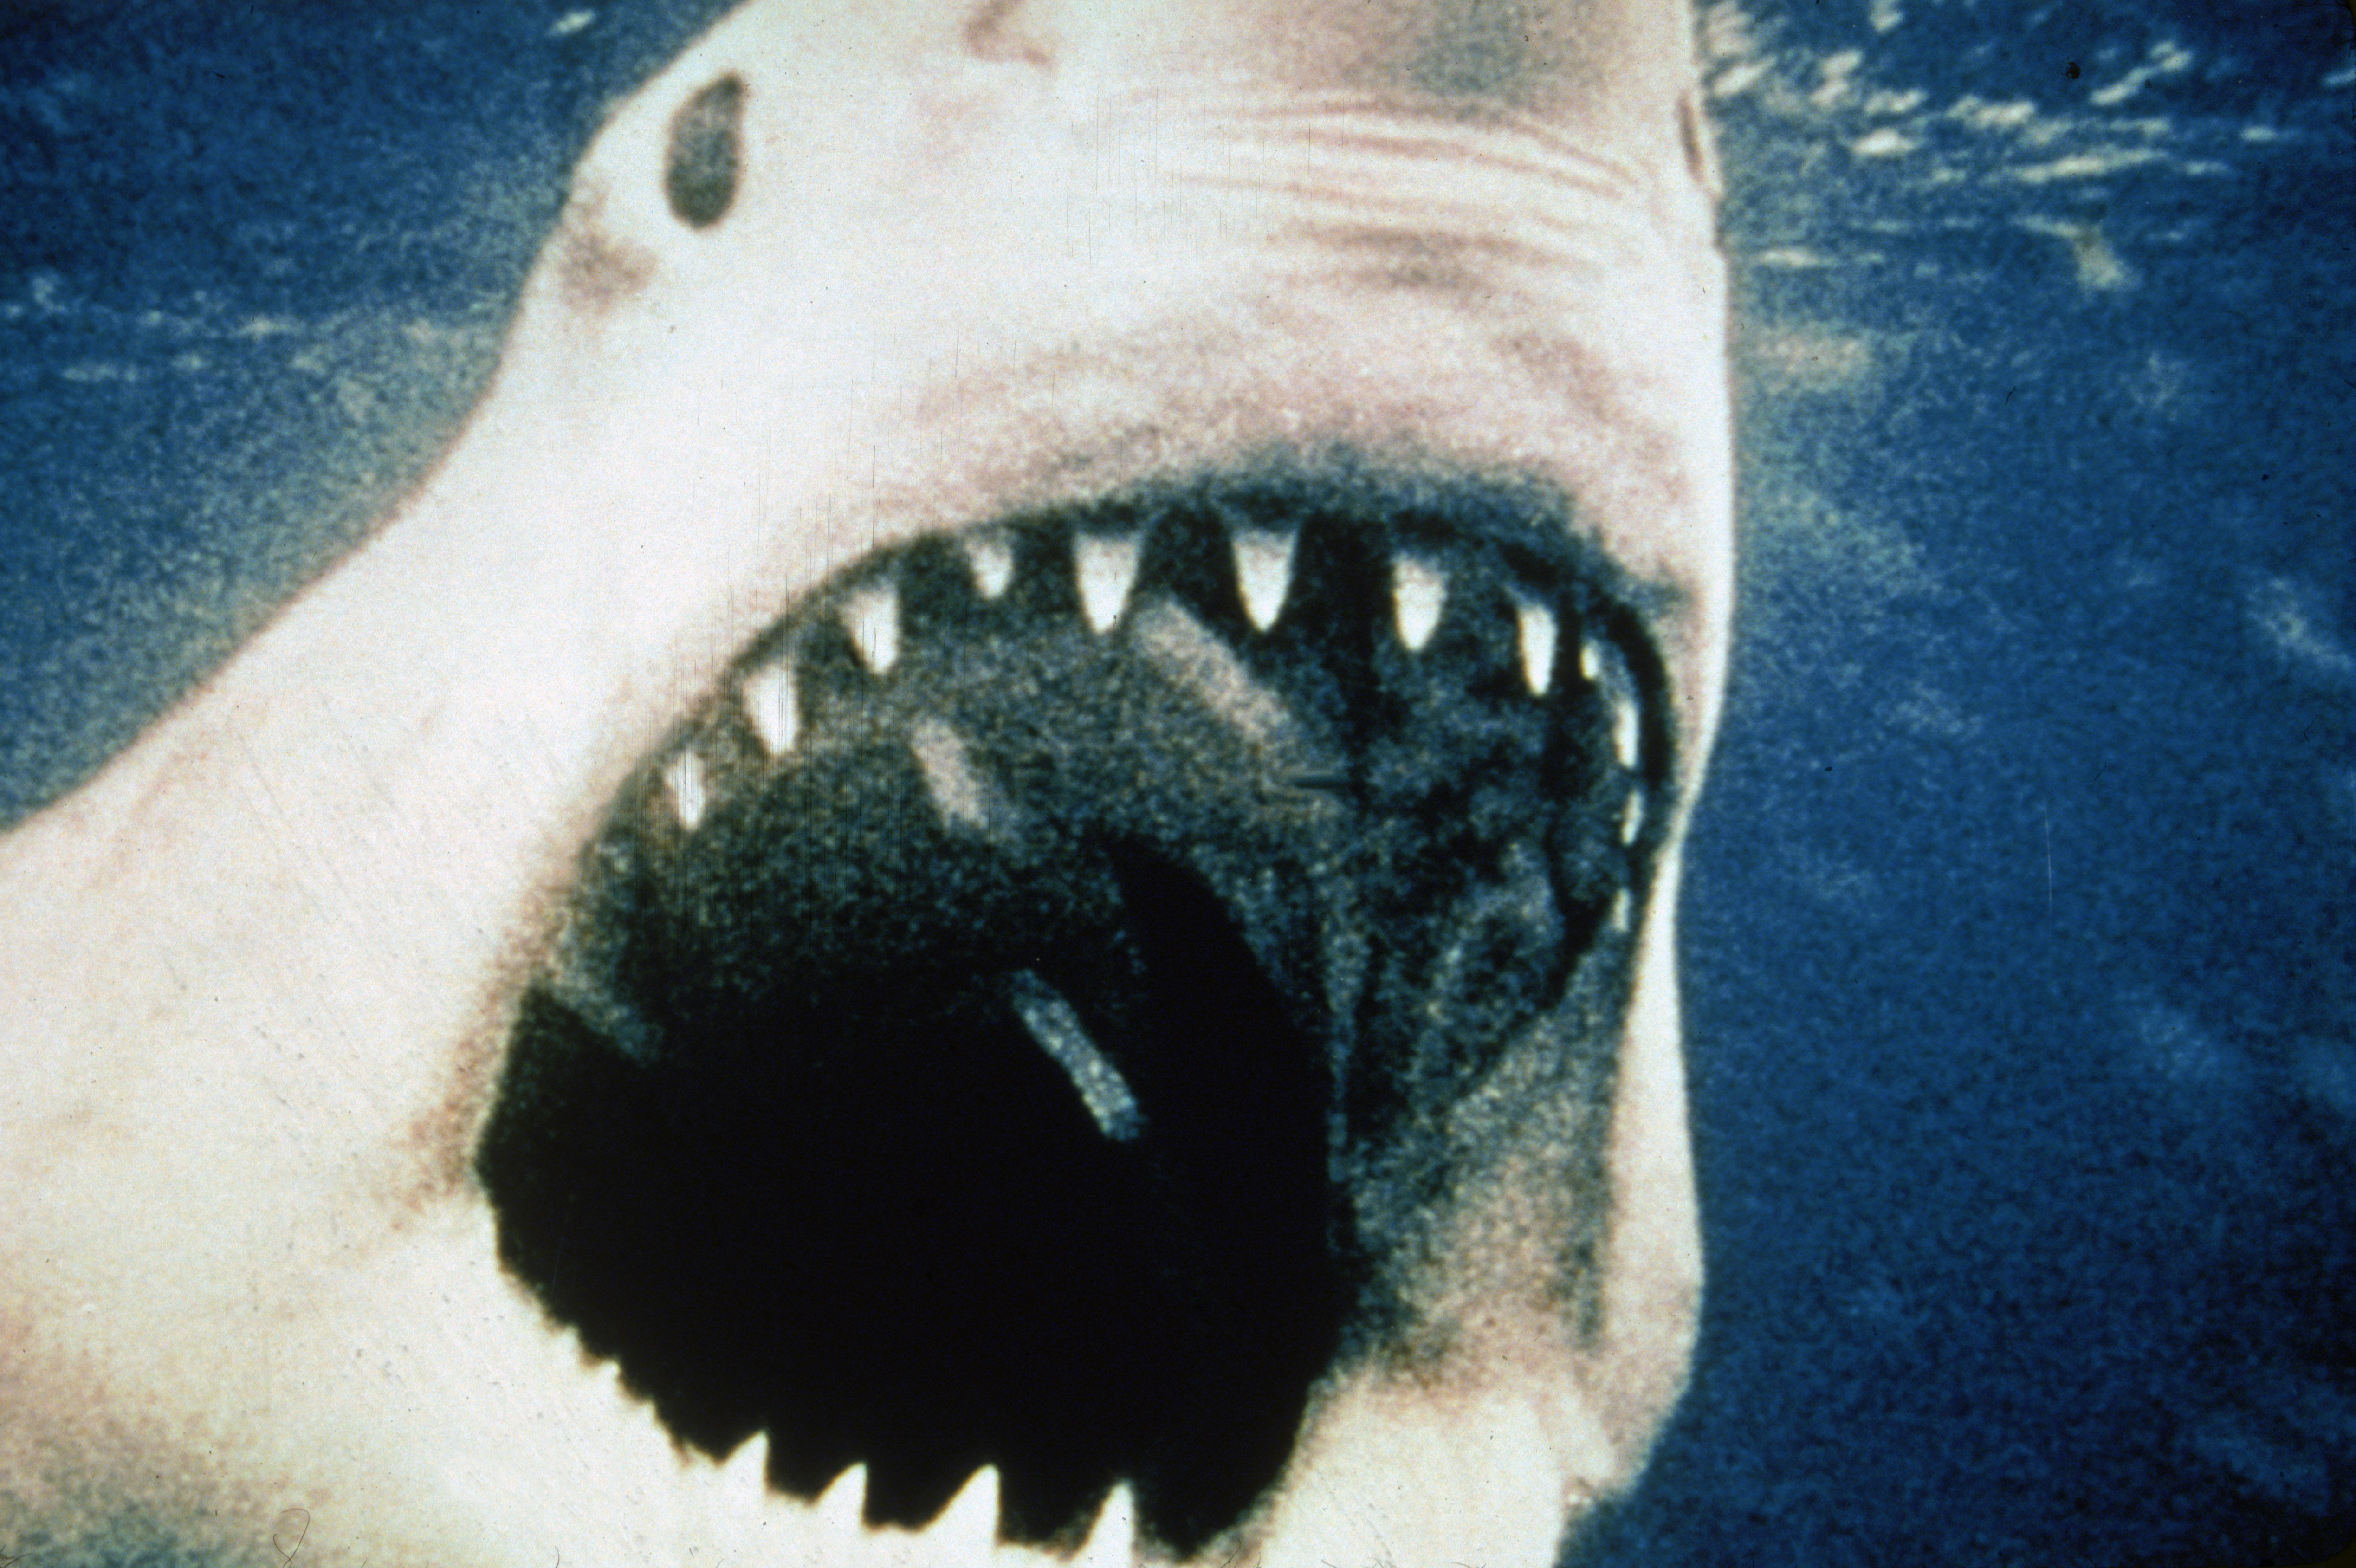 A closeup of a great white shark with its mouth open, moving toward the camera, from Steven Spielberg’s 1975 thriller Jaws